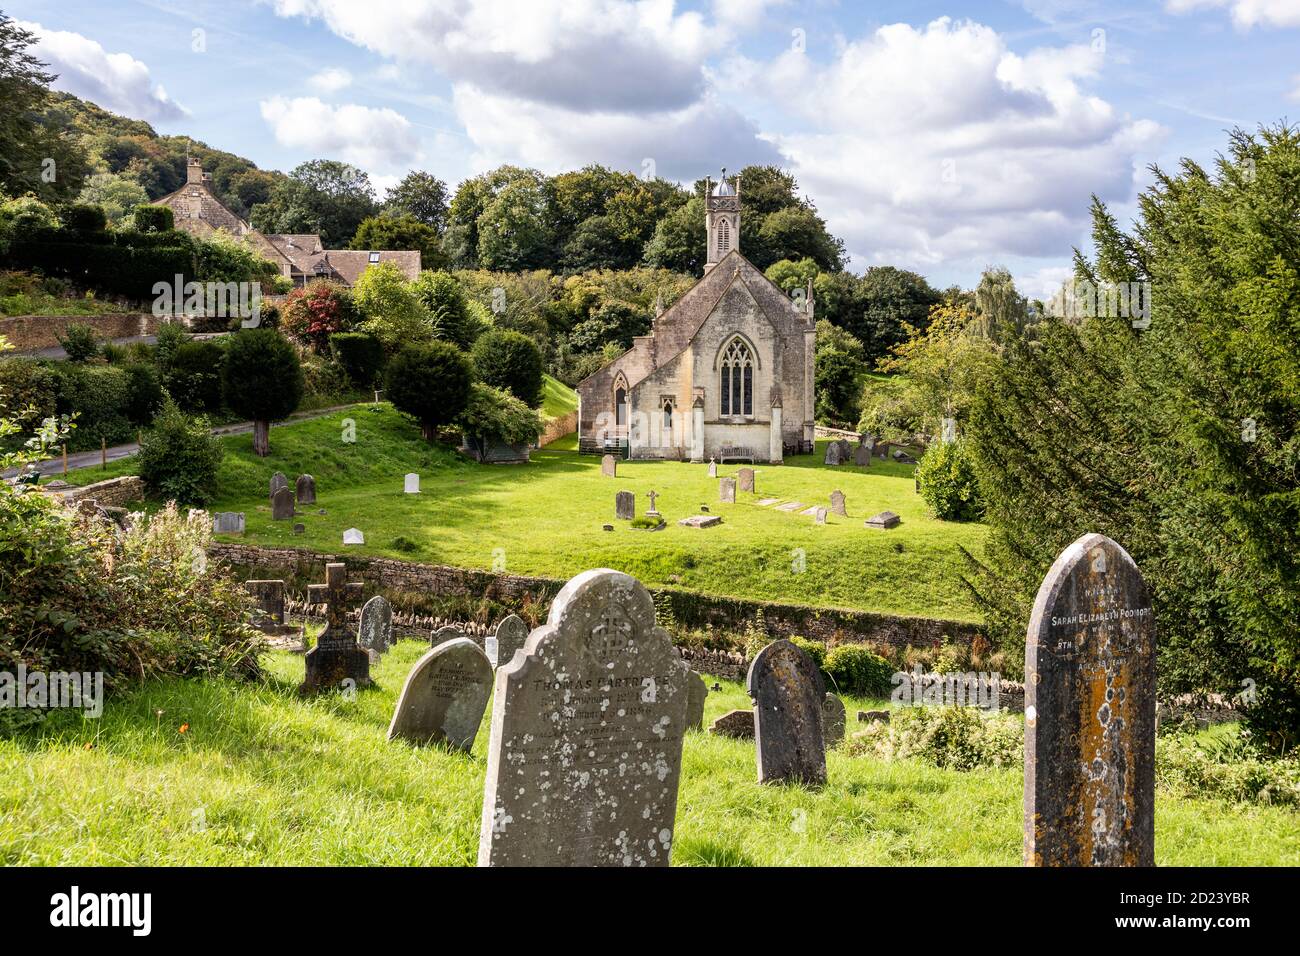 The church of St John in the Cotswold village of Sheepscombe, Gloucestershire UK - The churchyard is divided by a sunken lane. Stock Photo